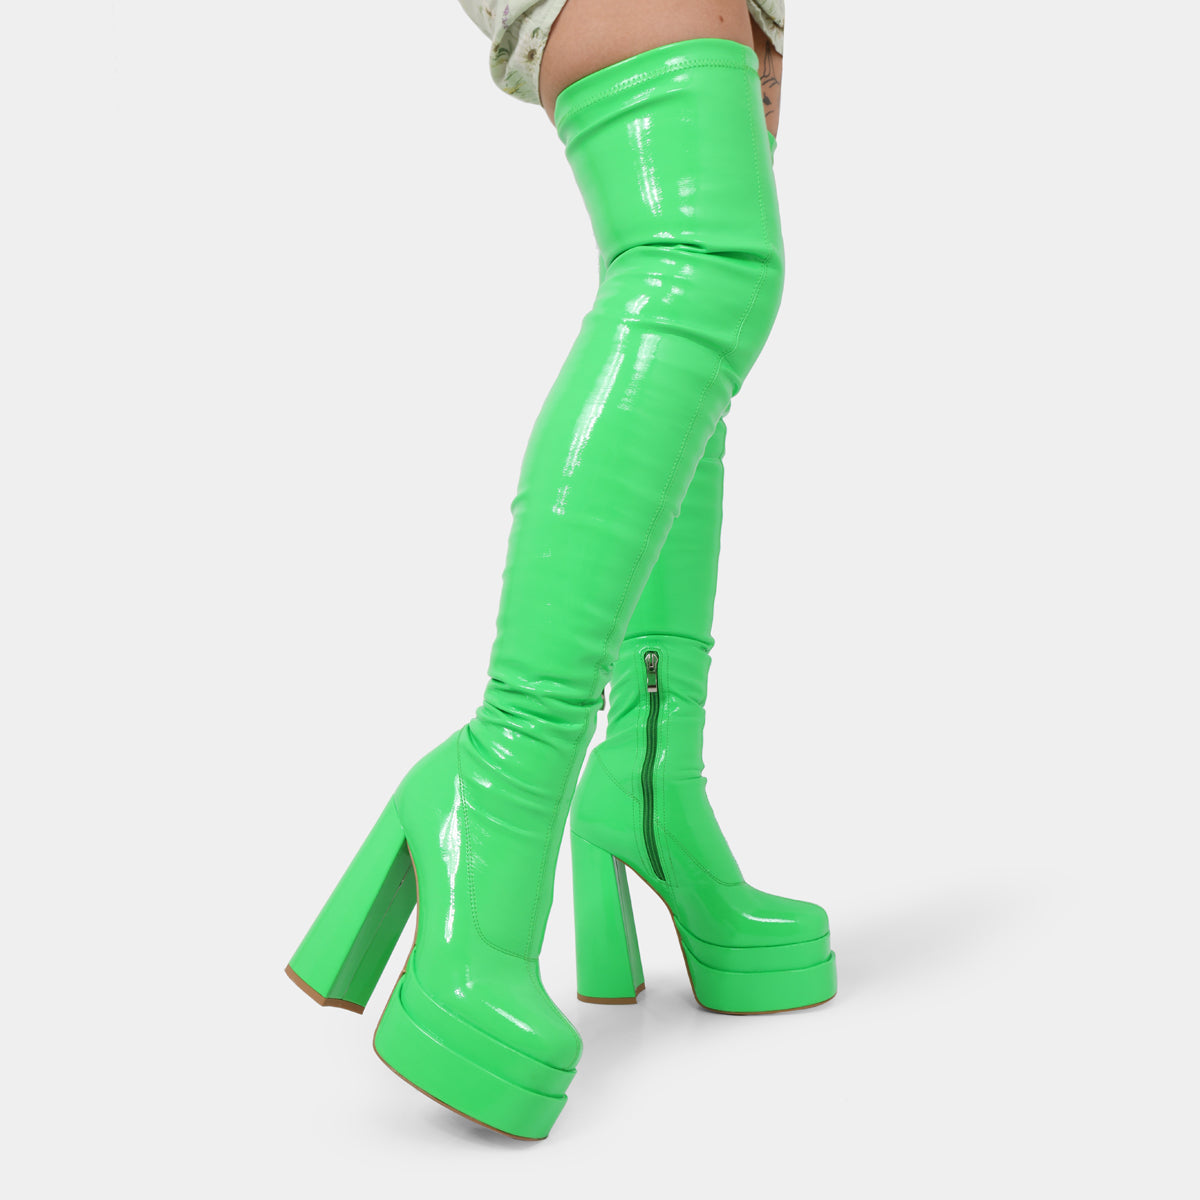 The Redemption Green Stretch Thigh High Boots - Long Boots - KOI Footwear - Green - Model Right View